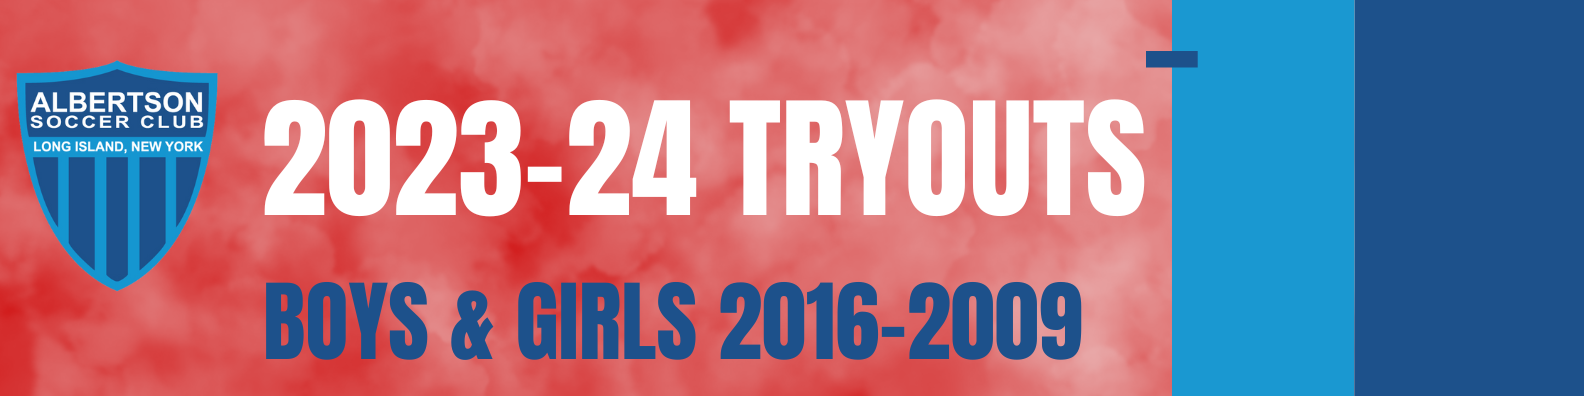 23:24 Tryouts Banner